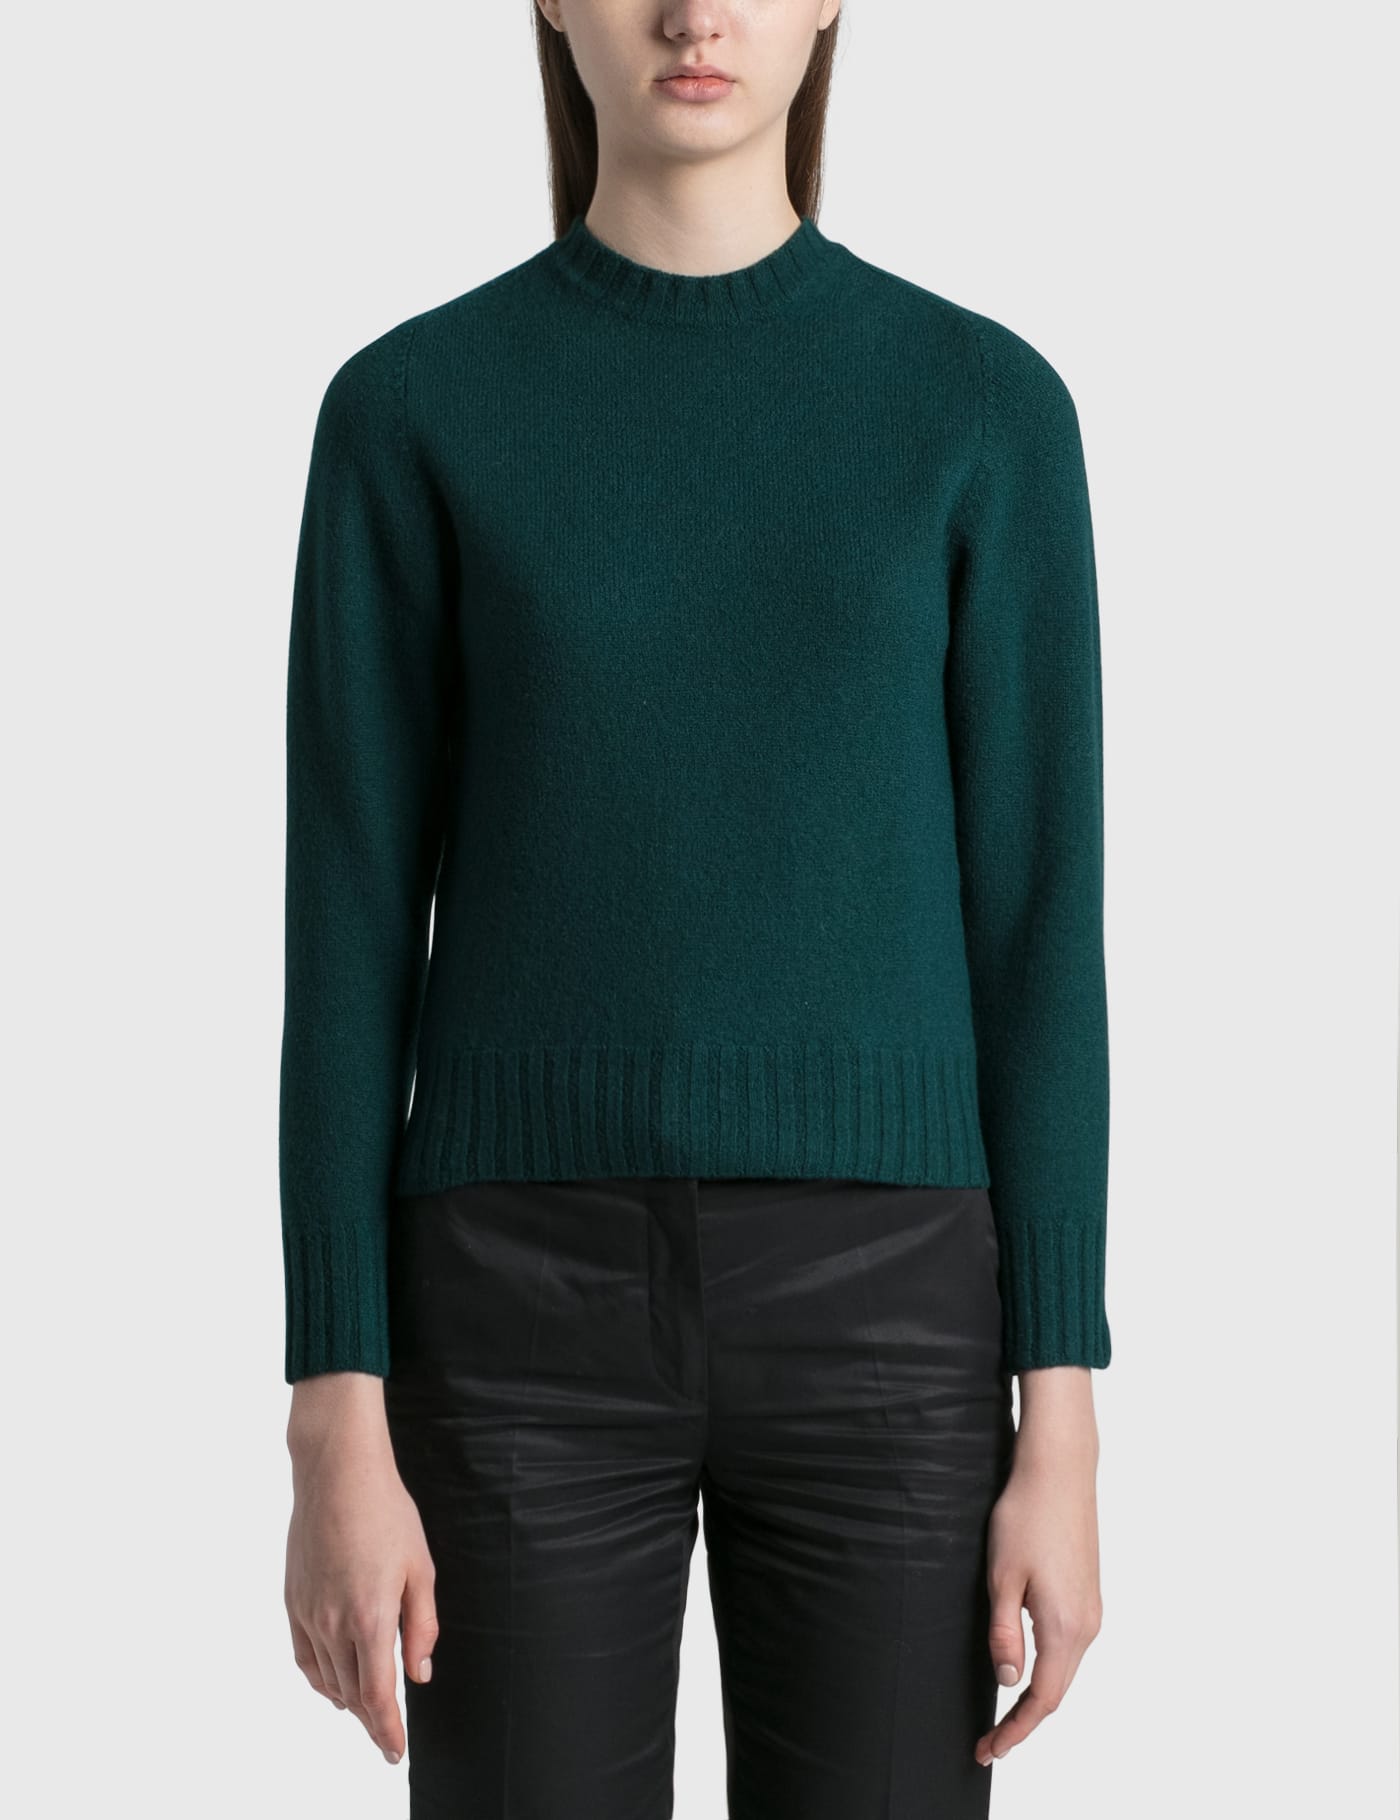 Jil Sander - Shrunken Wool Sweater | HBX - Globally Curated Fashion and  Lifestyle by Hypebeast